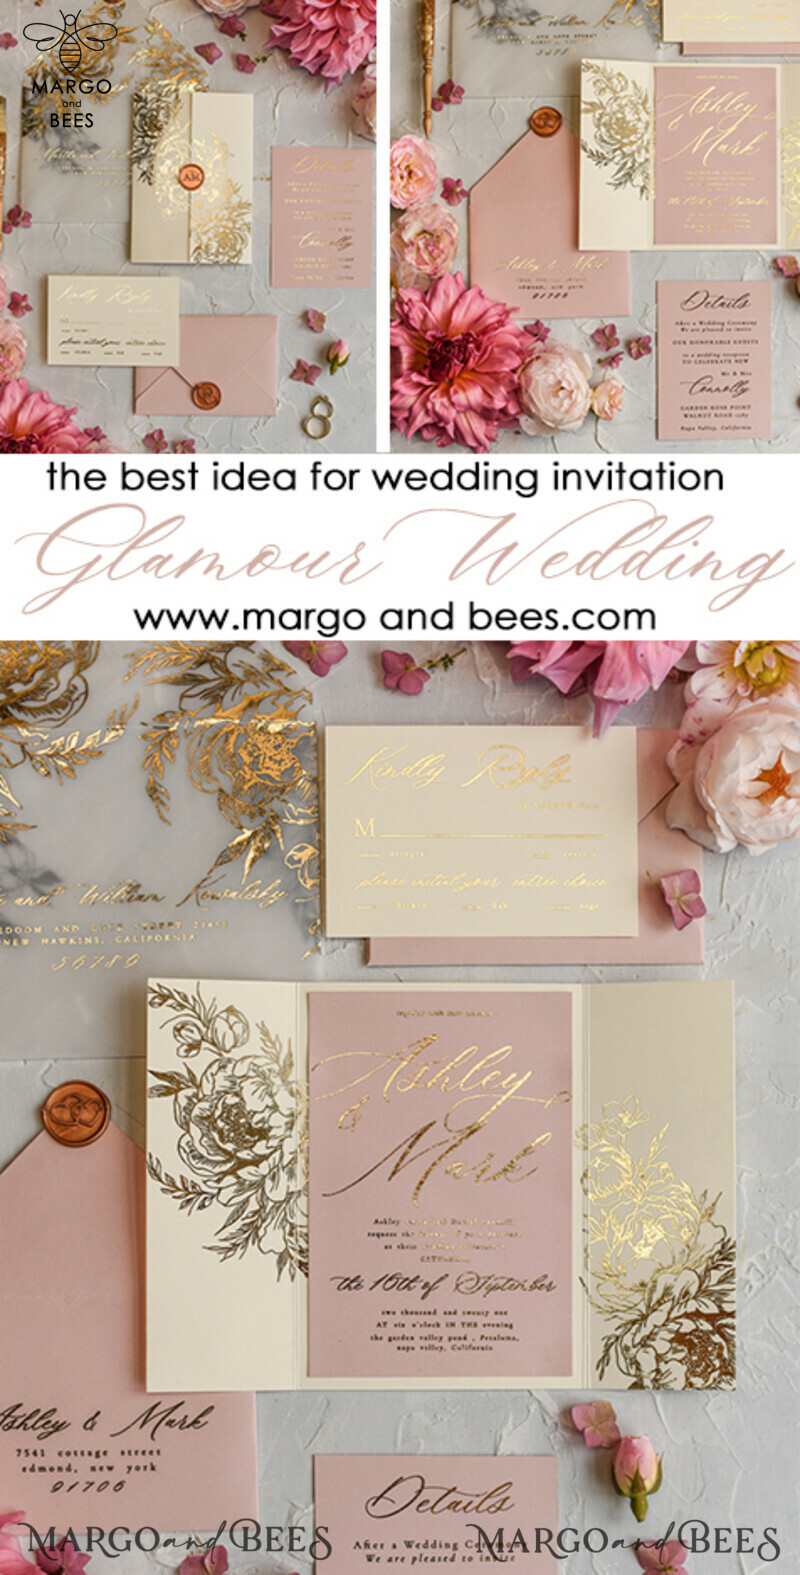 Elegant and Personalized: Romantic Glamour Wedding Cards with Golden Shine and Luxury Blush Pink - Bespoke Romantic Wedding Invitations and Stationery.-4